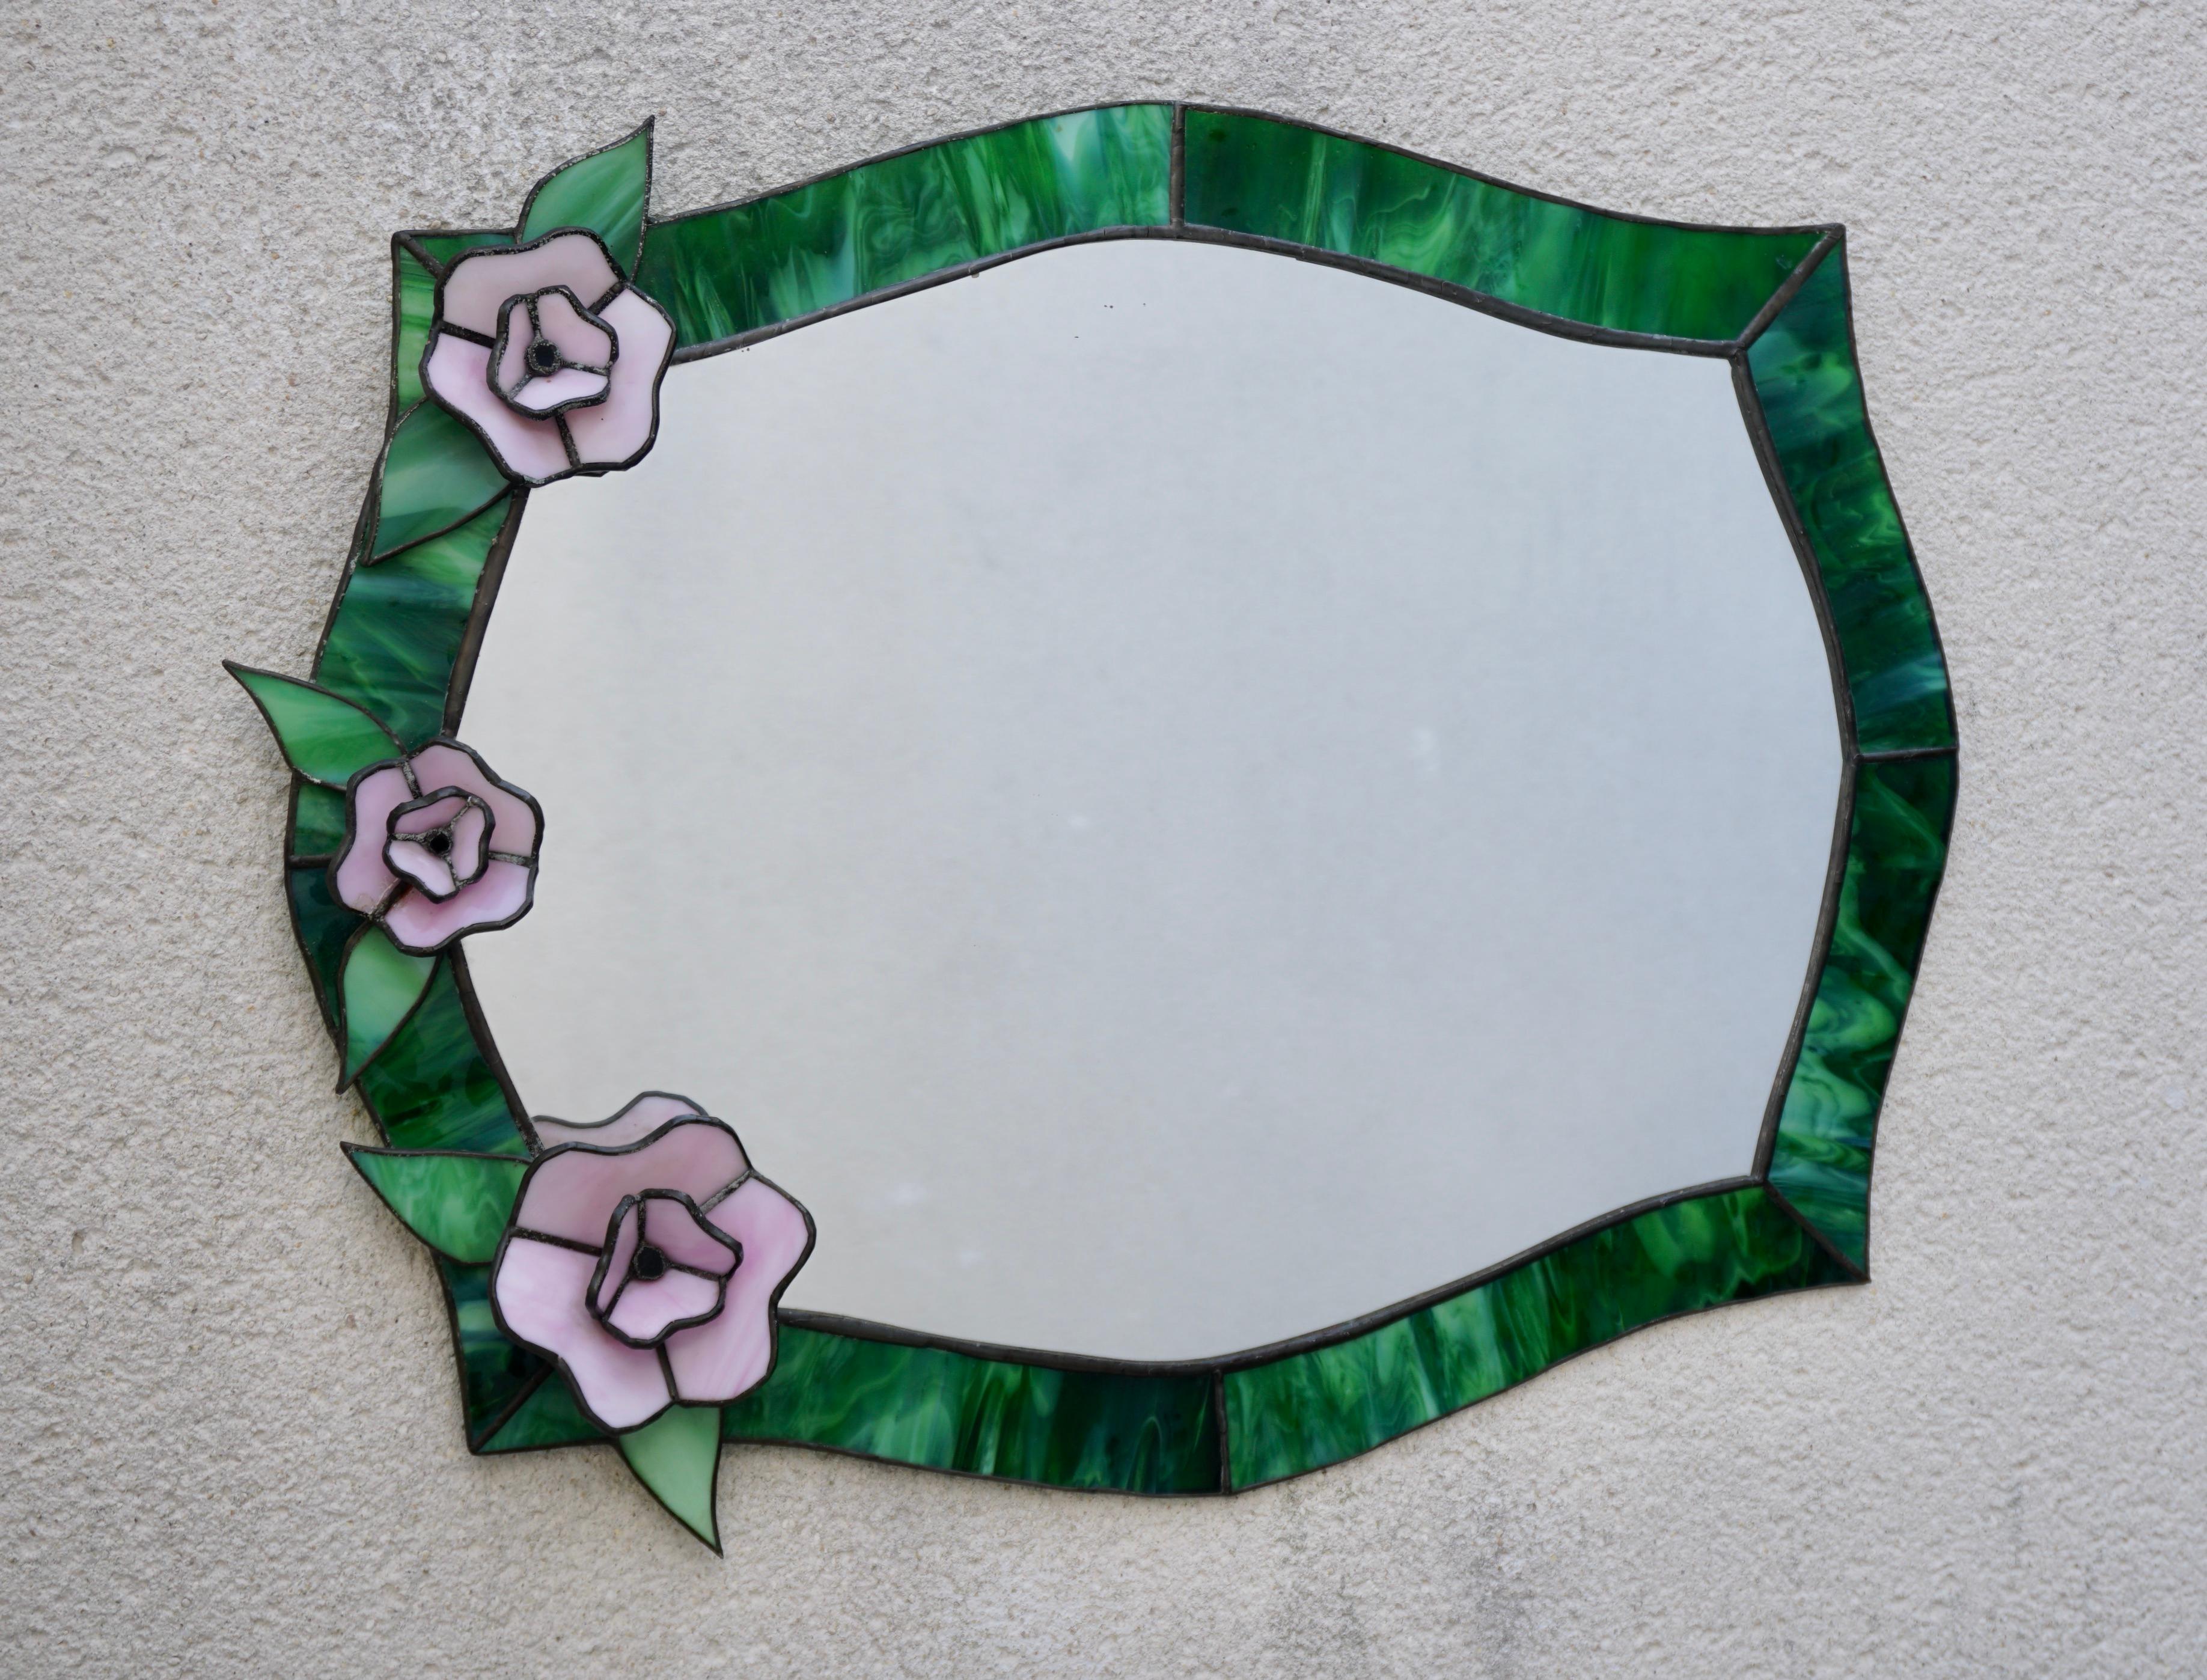 Beautiful green Tiffany stained glass mirror with pink flowers.

Width 20.8